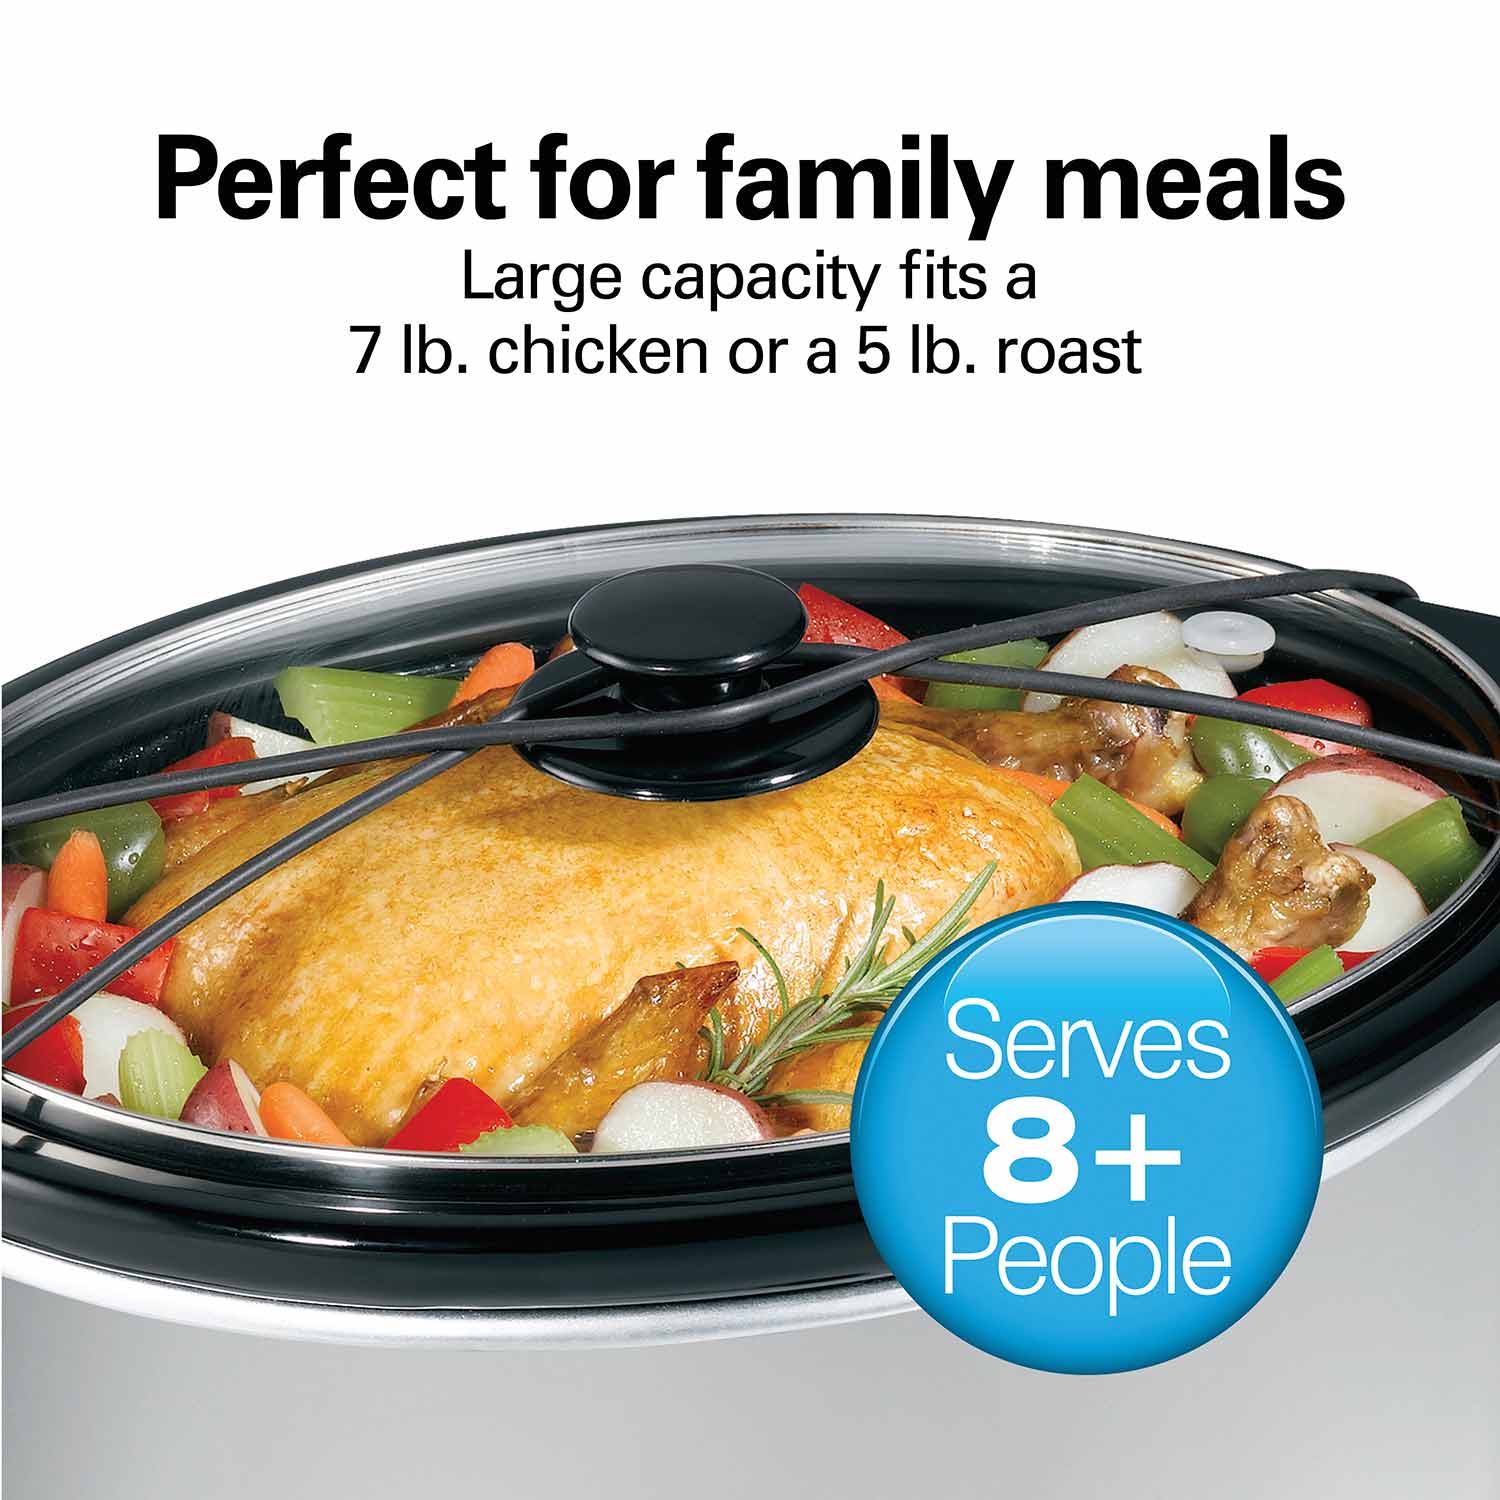  Hamilton Beach Portable 7 Quart Programmable Slow Cooker with  Three Temperature Settings, Lid Latch Strap for Easy Travel, Dishwasher  Safe Crock, Black (33474): Home & Kitchen